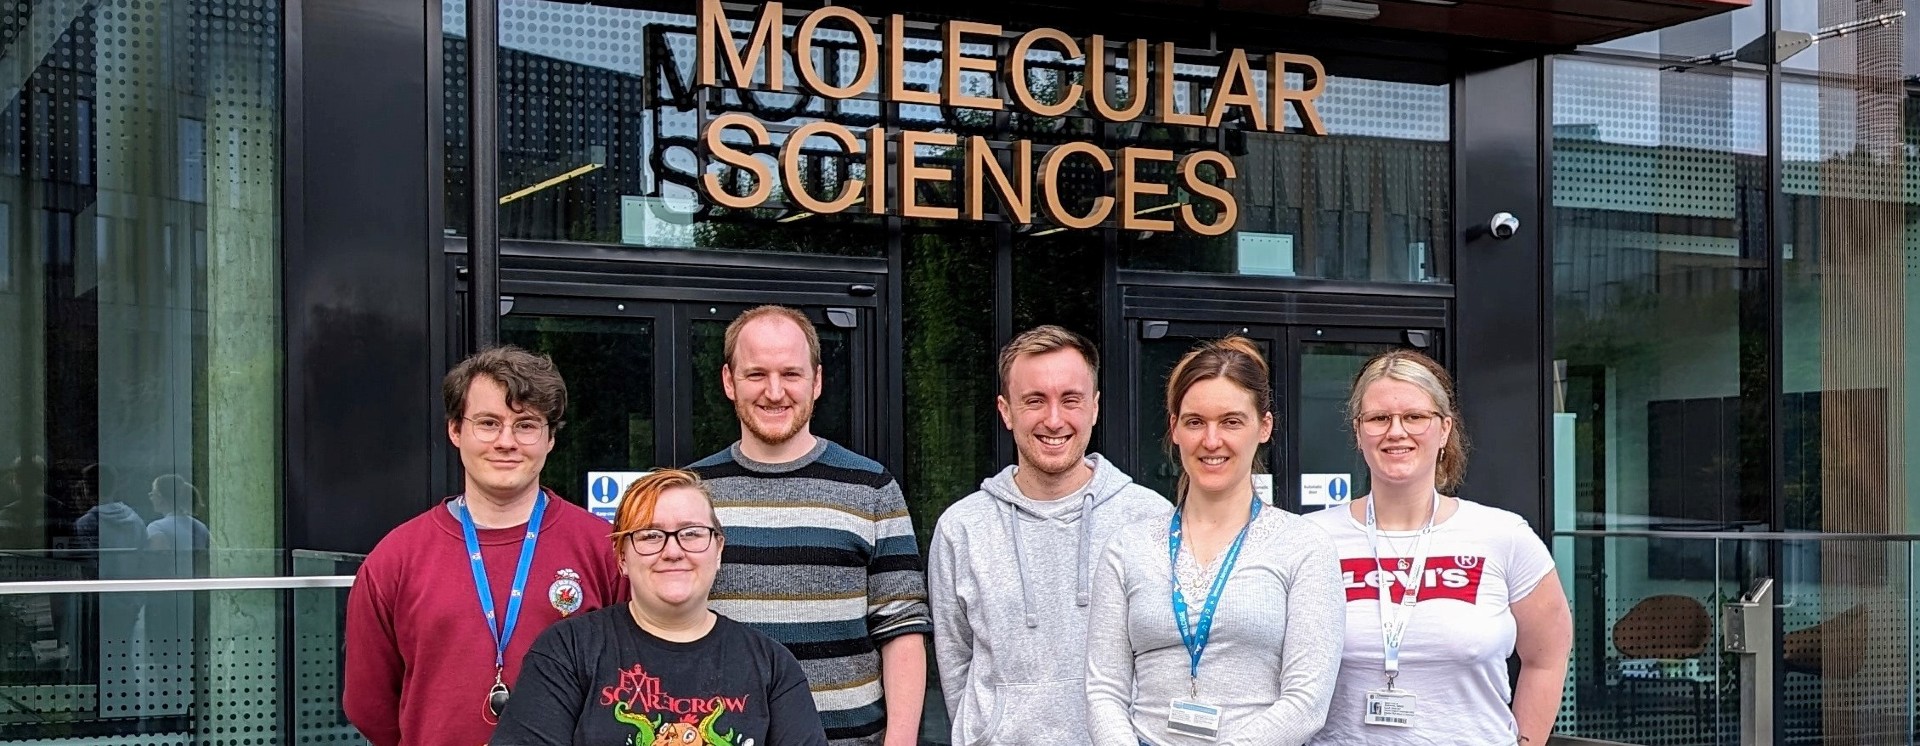 Andrew Jupp with lab  colleagues outside the Molecular Sciences building